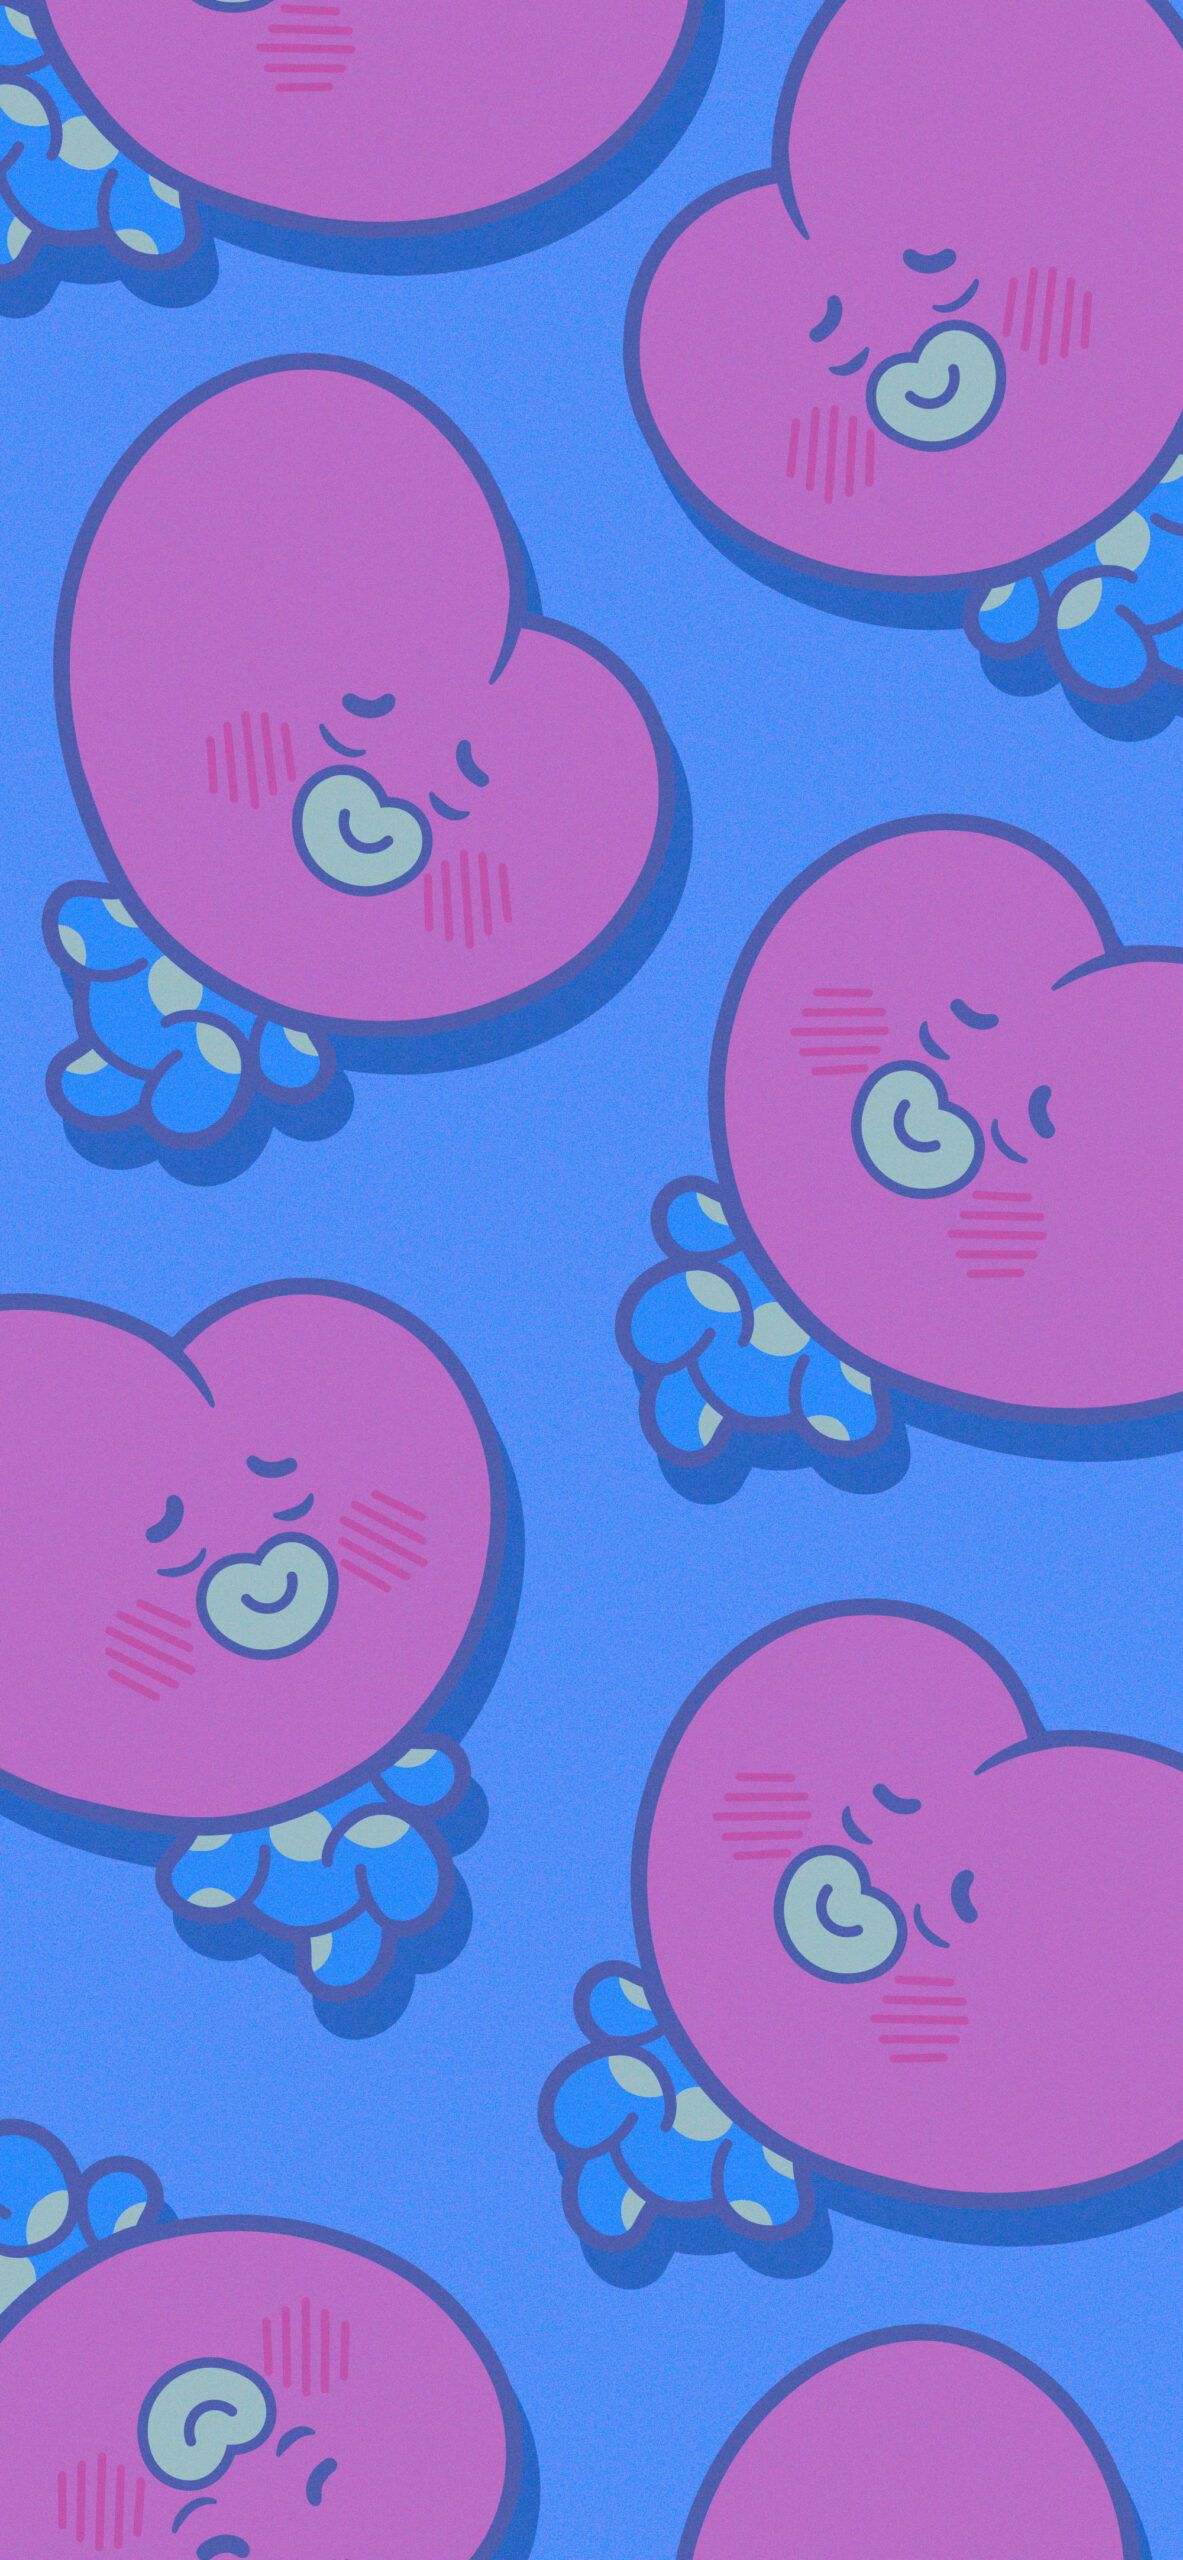 A pattern of pink hearts on blue background - BT21